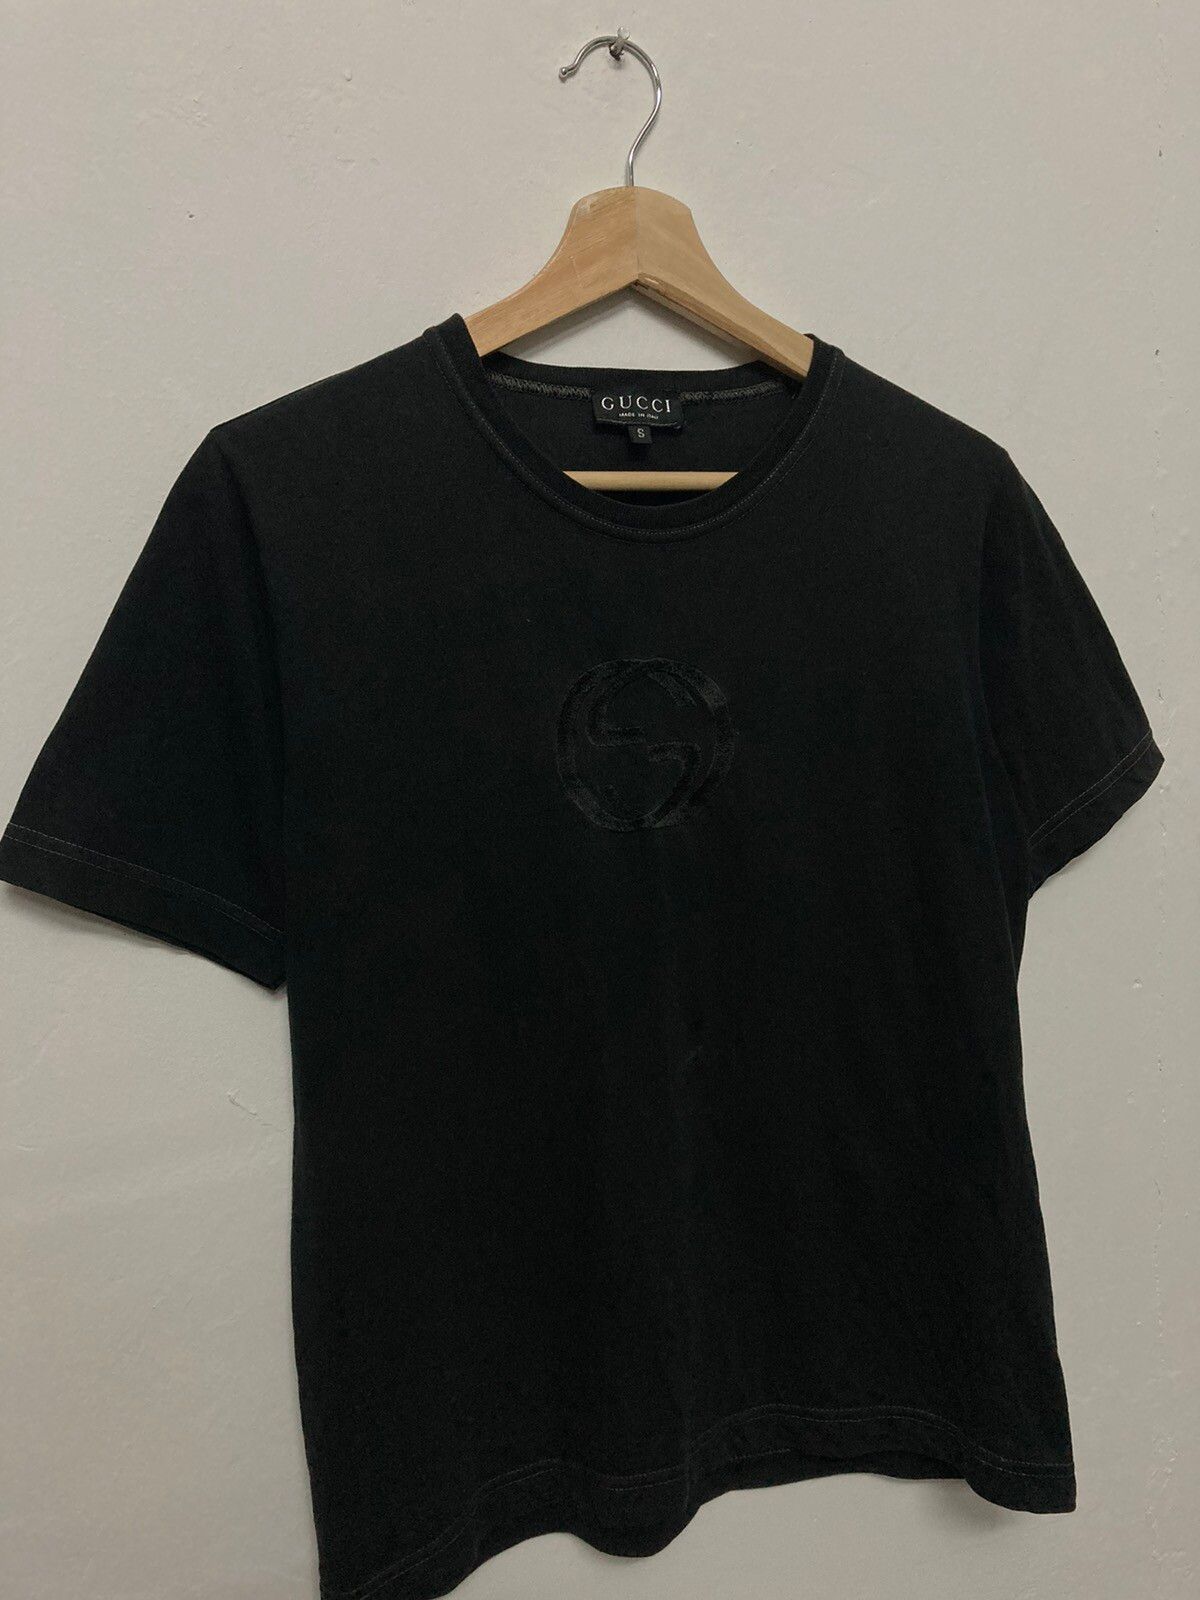 Gucci Embroidery Big Logo Shirt Made in Italy - 6